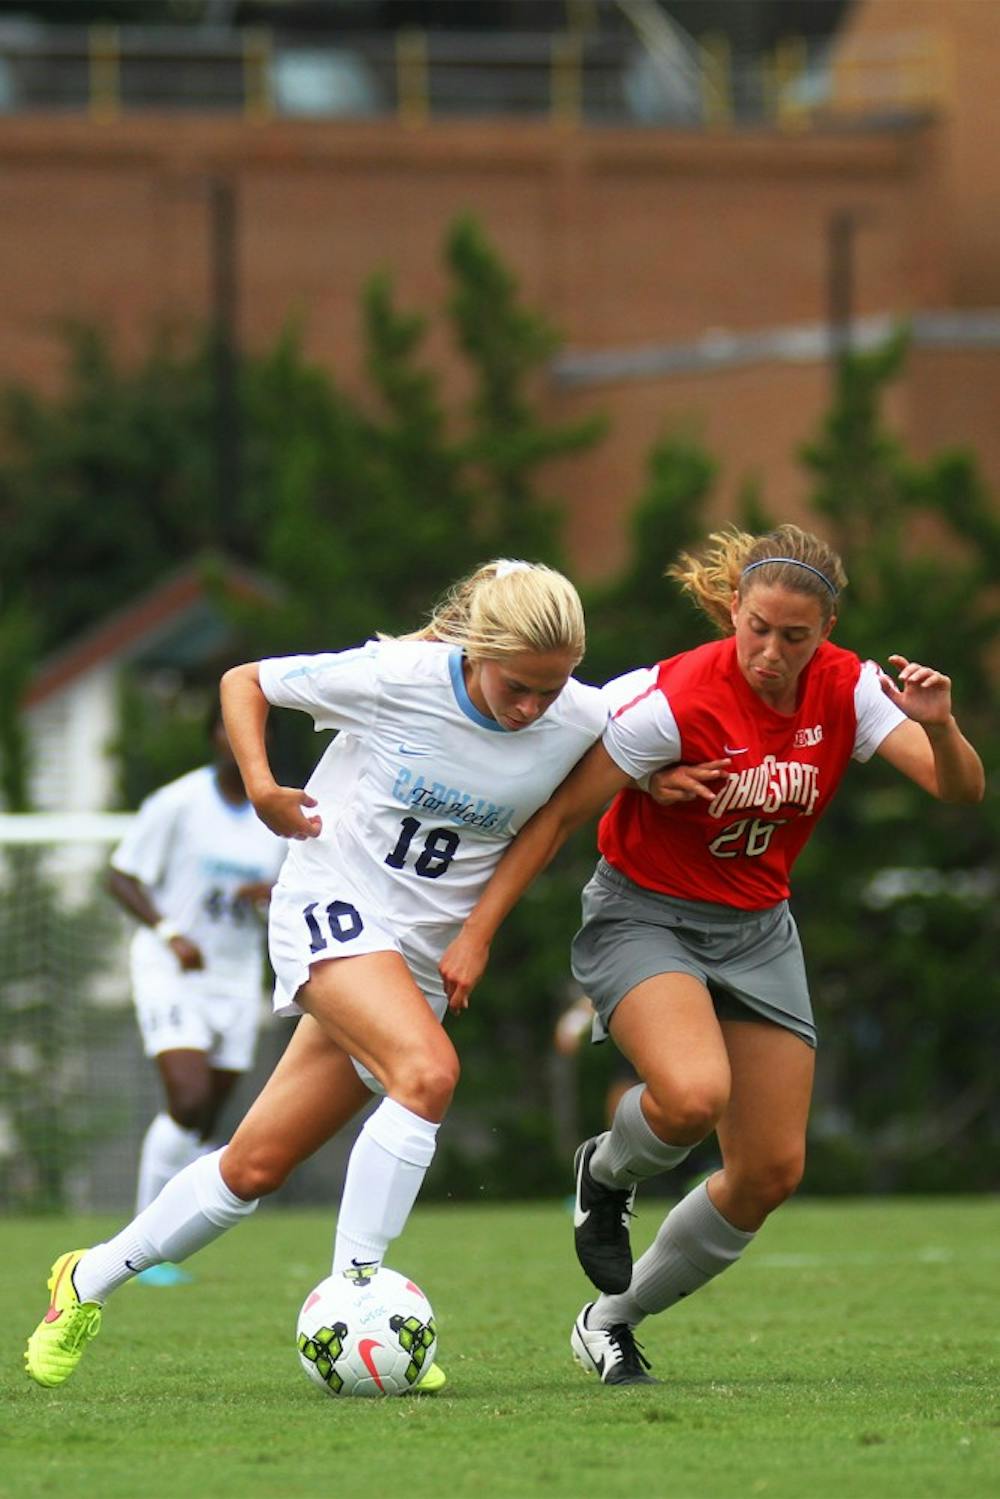 UNC midfielder Megan Buckingham (18) tries to create space between herself and Ohio State midfielder Sydney Dudley (26).  Buckingham would go on to score the game-winner for the Tar Heels in their 1-0 win.